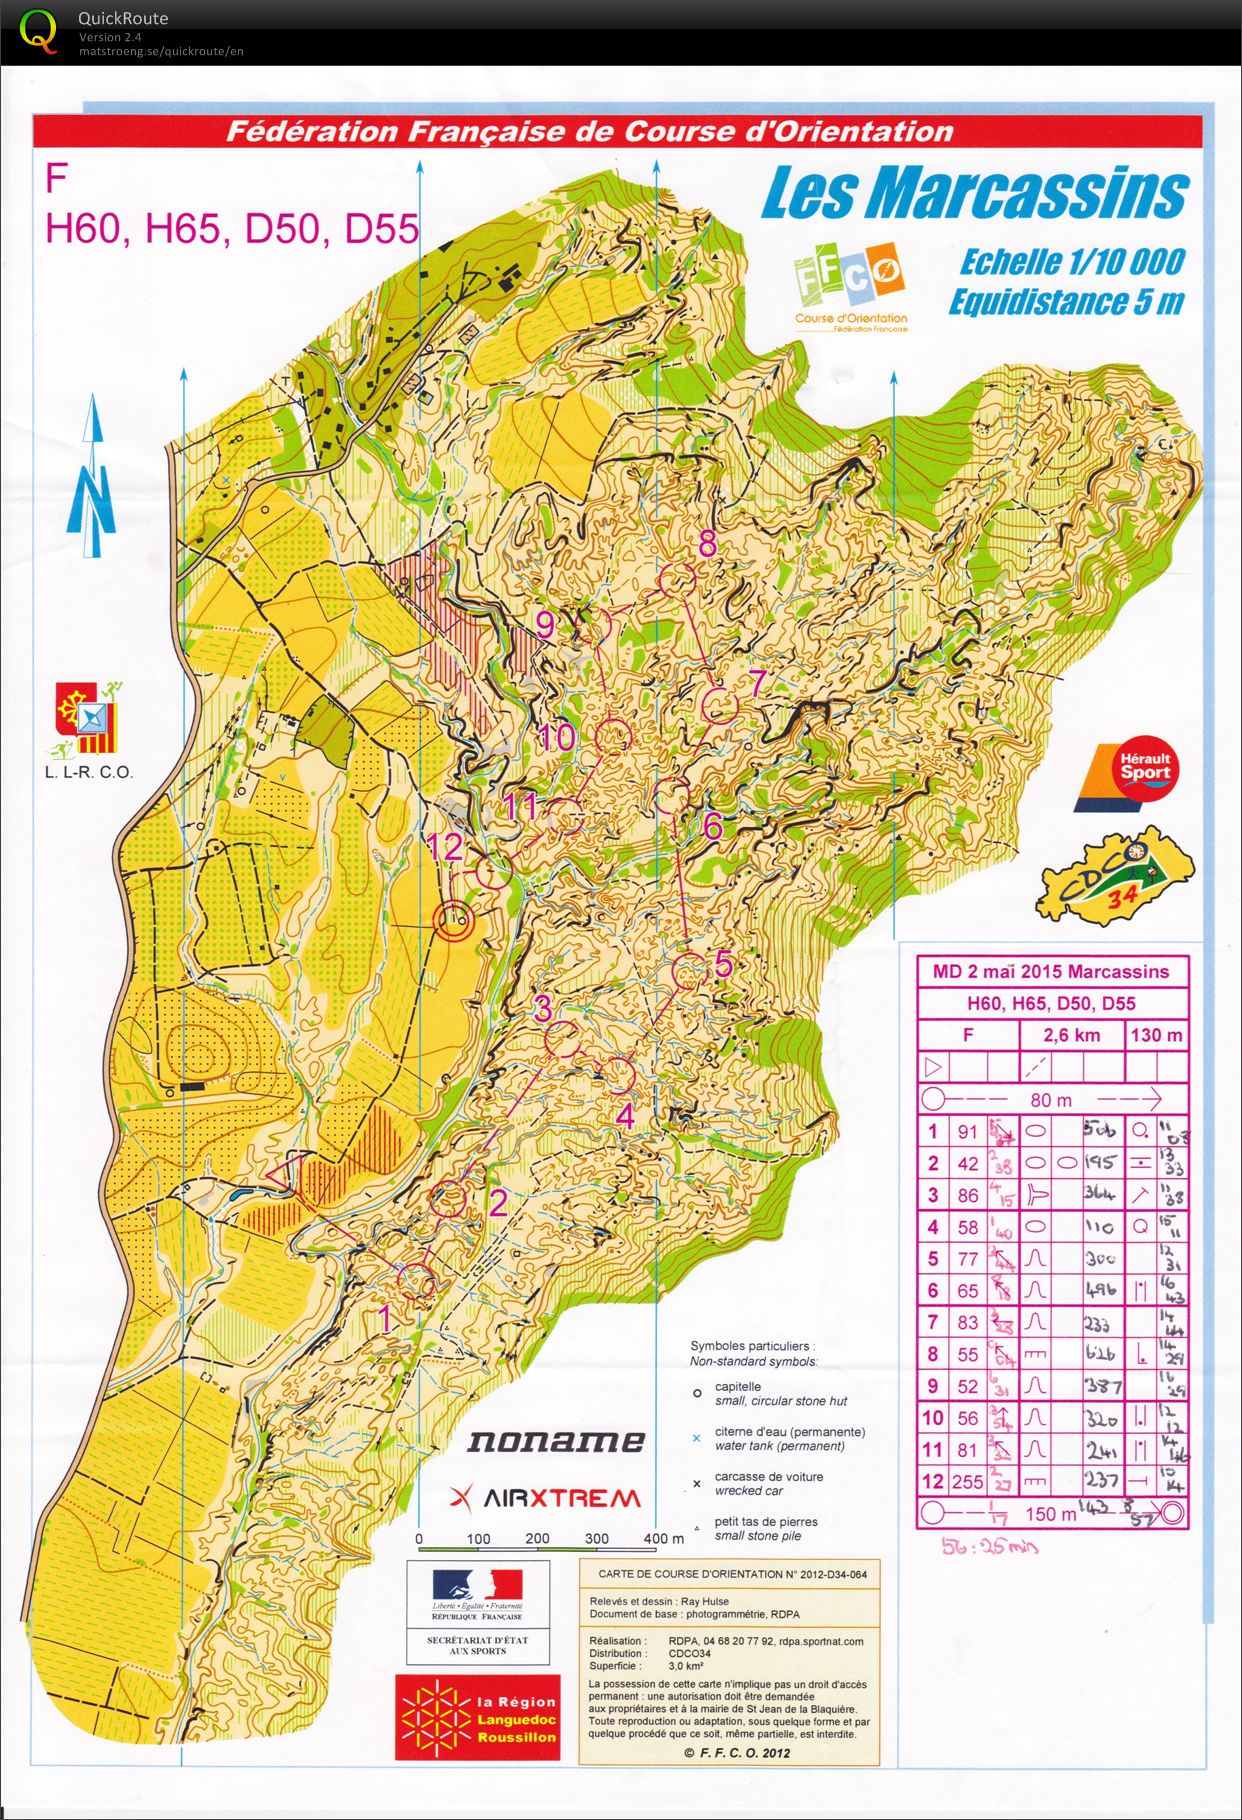 Weekend Nationale Sud-Ouest - Moyenne Distance (2015-05-02)